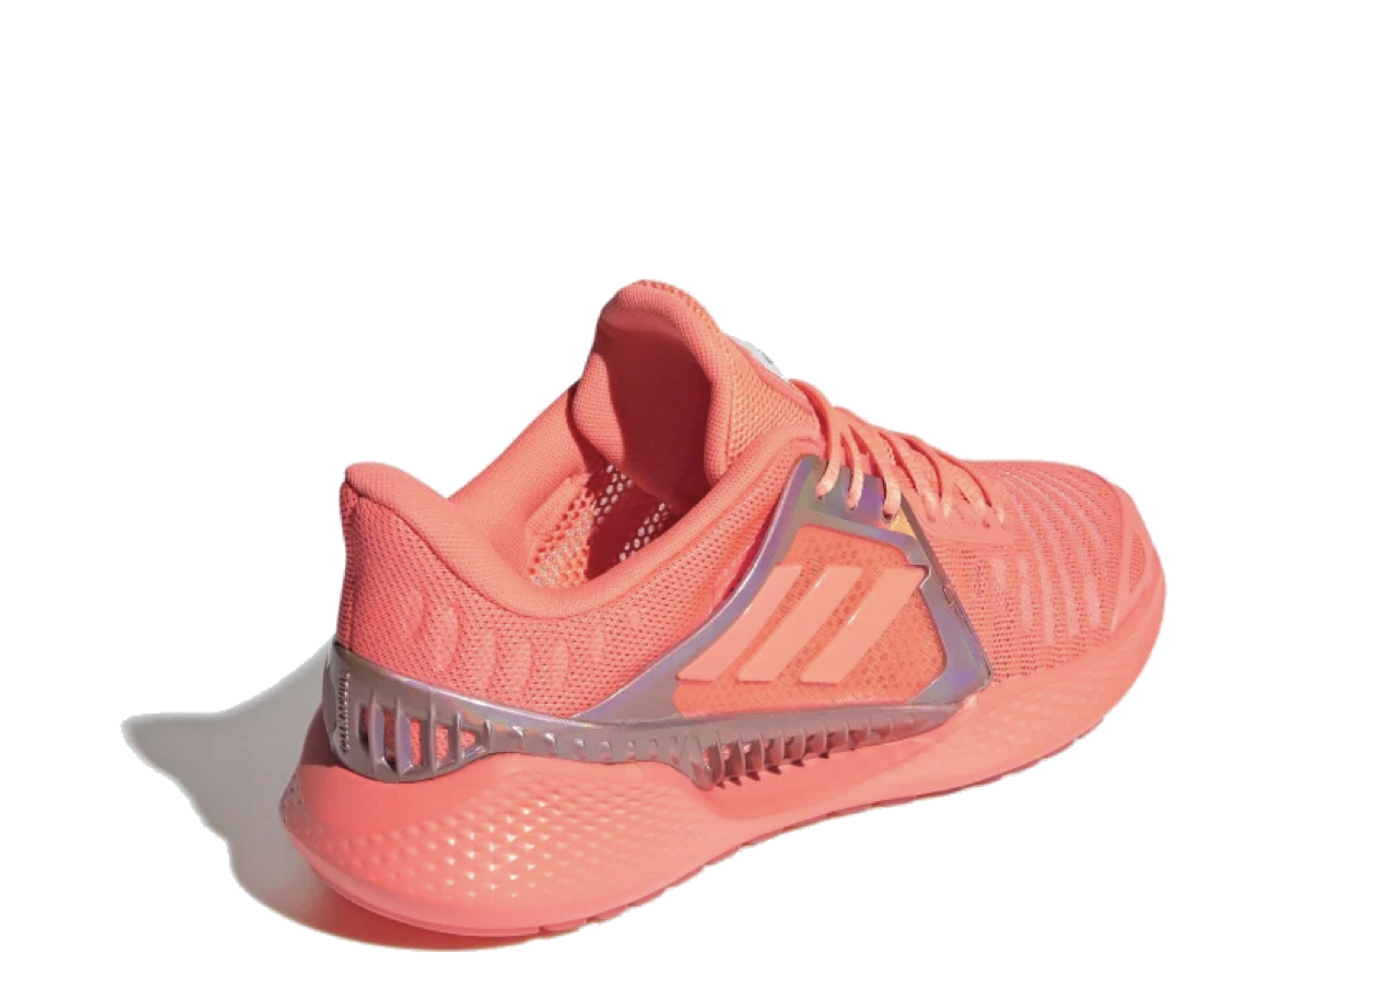 Buy Climacool Vent Summer.Rdy 'Signal Coral' - EE4639